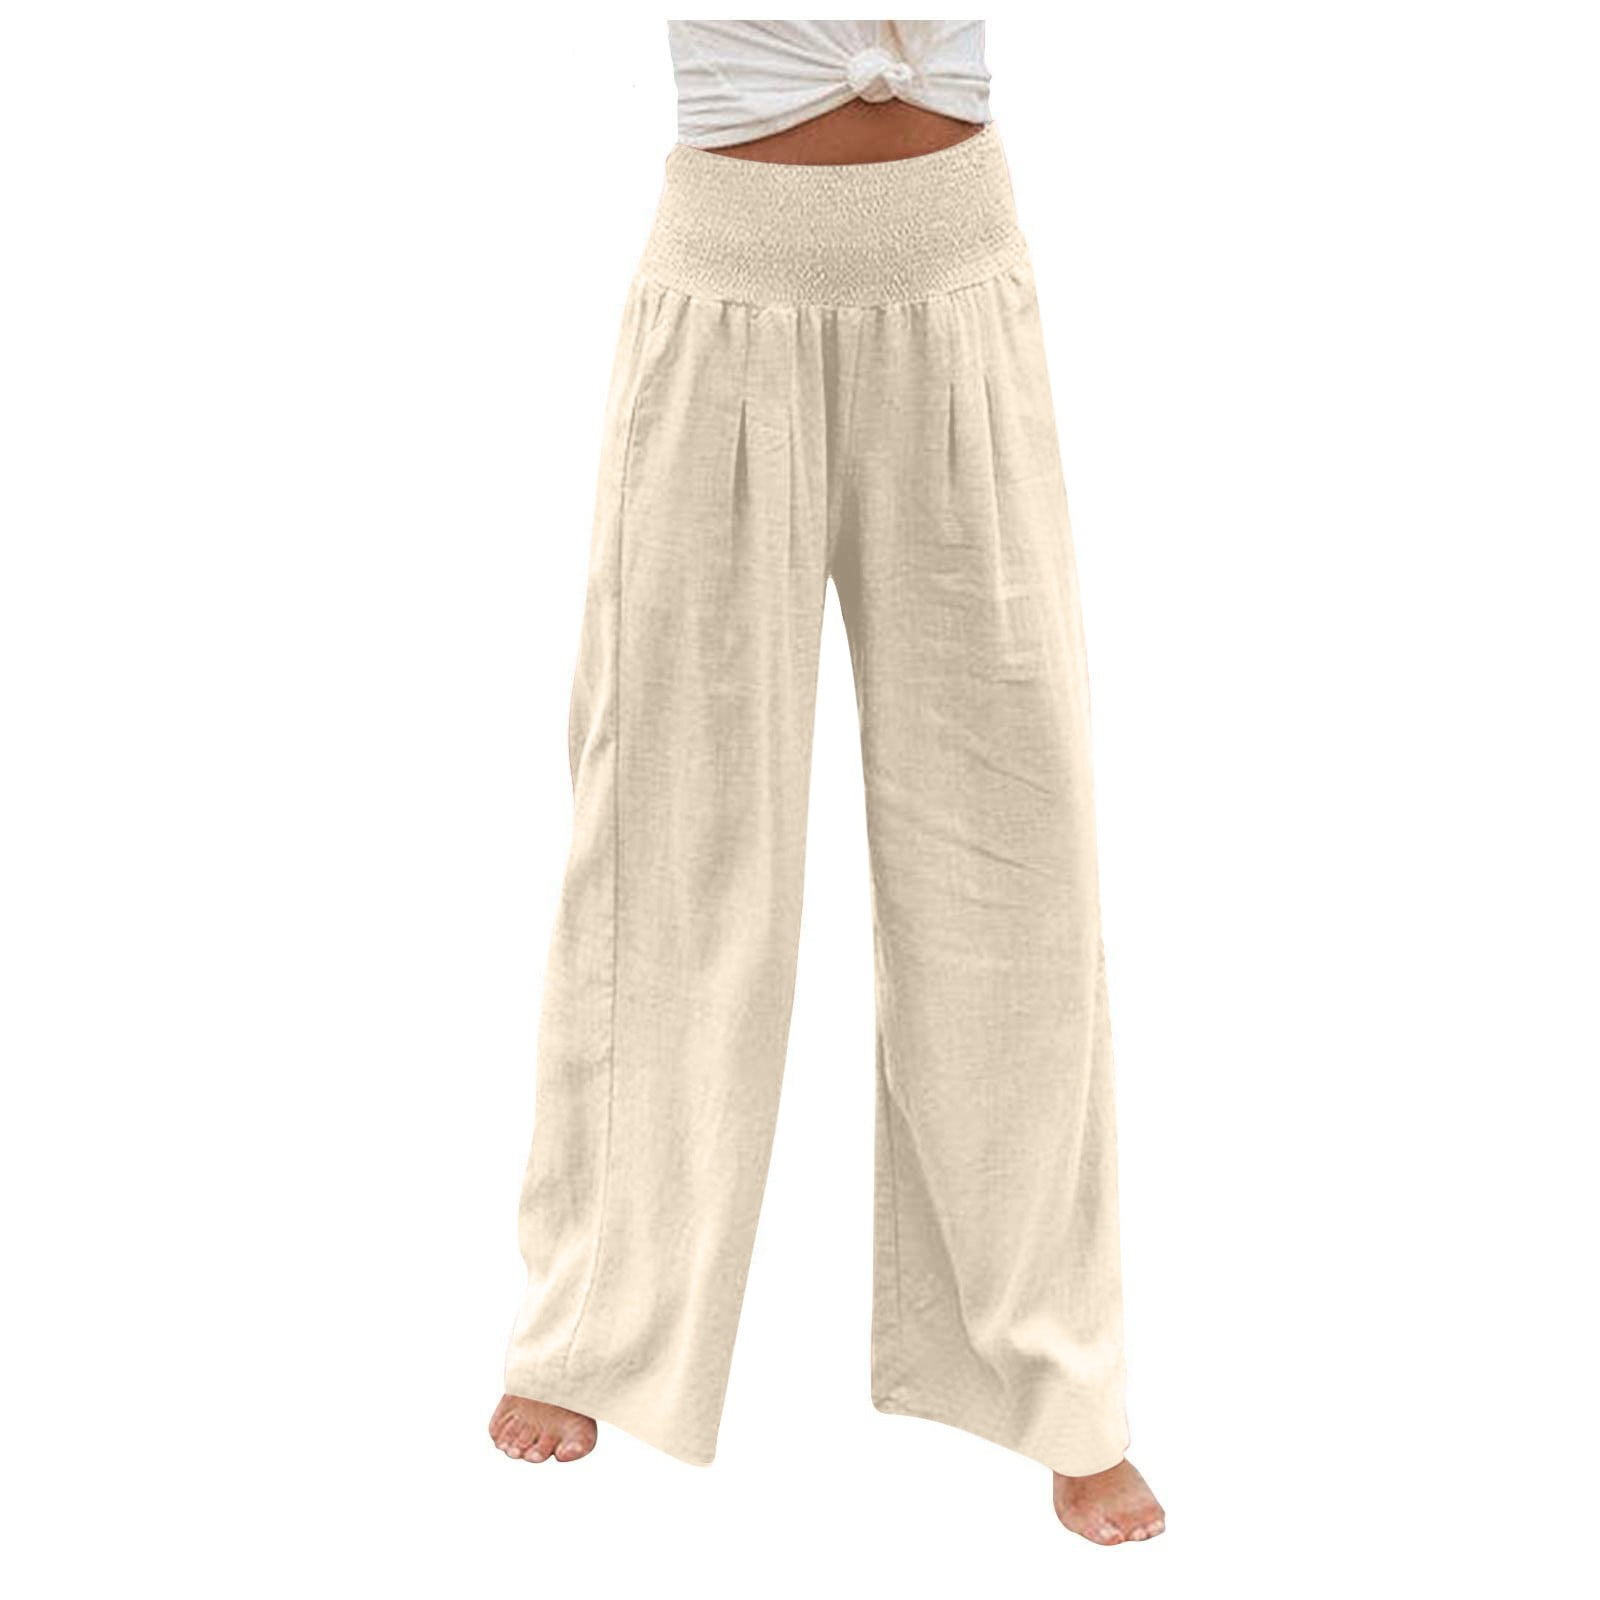 Women's Ruched Elastic Waist Palazzo Pants Wide Leg Hippie Loose Indian ...